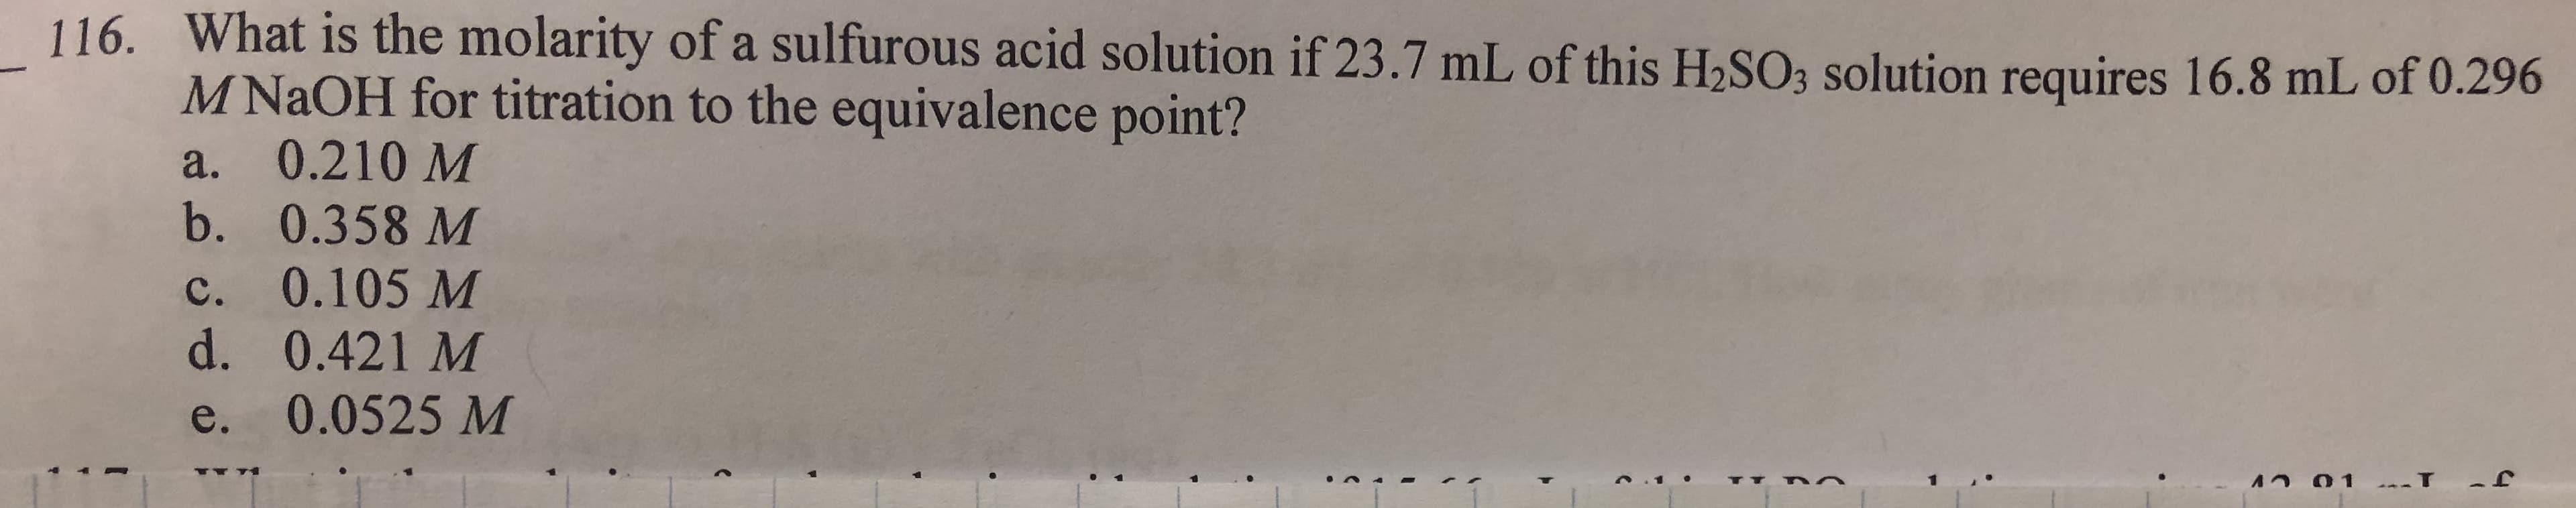 116.
What is the molarity of a sulfurous acid solution if 23.7 mL of this H2SO, solution requires 16.8 ml
of 0.296
M NaOH for titration to the equivalence point?
a. 0.210 M
b. 0.358 M
c. 0.105 M
d. 0.421 M
e. 0.0525 M
